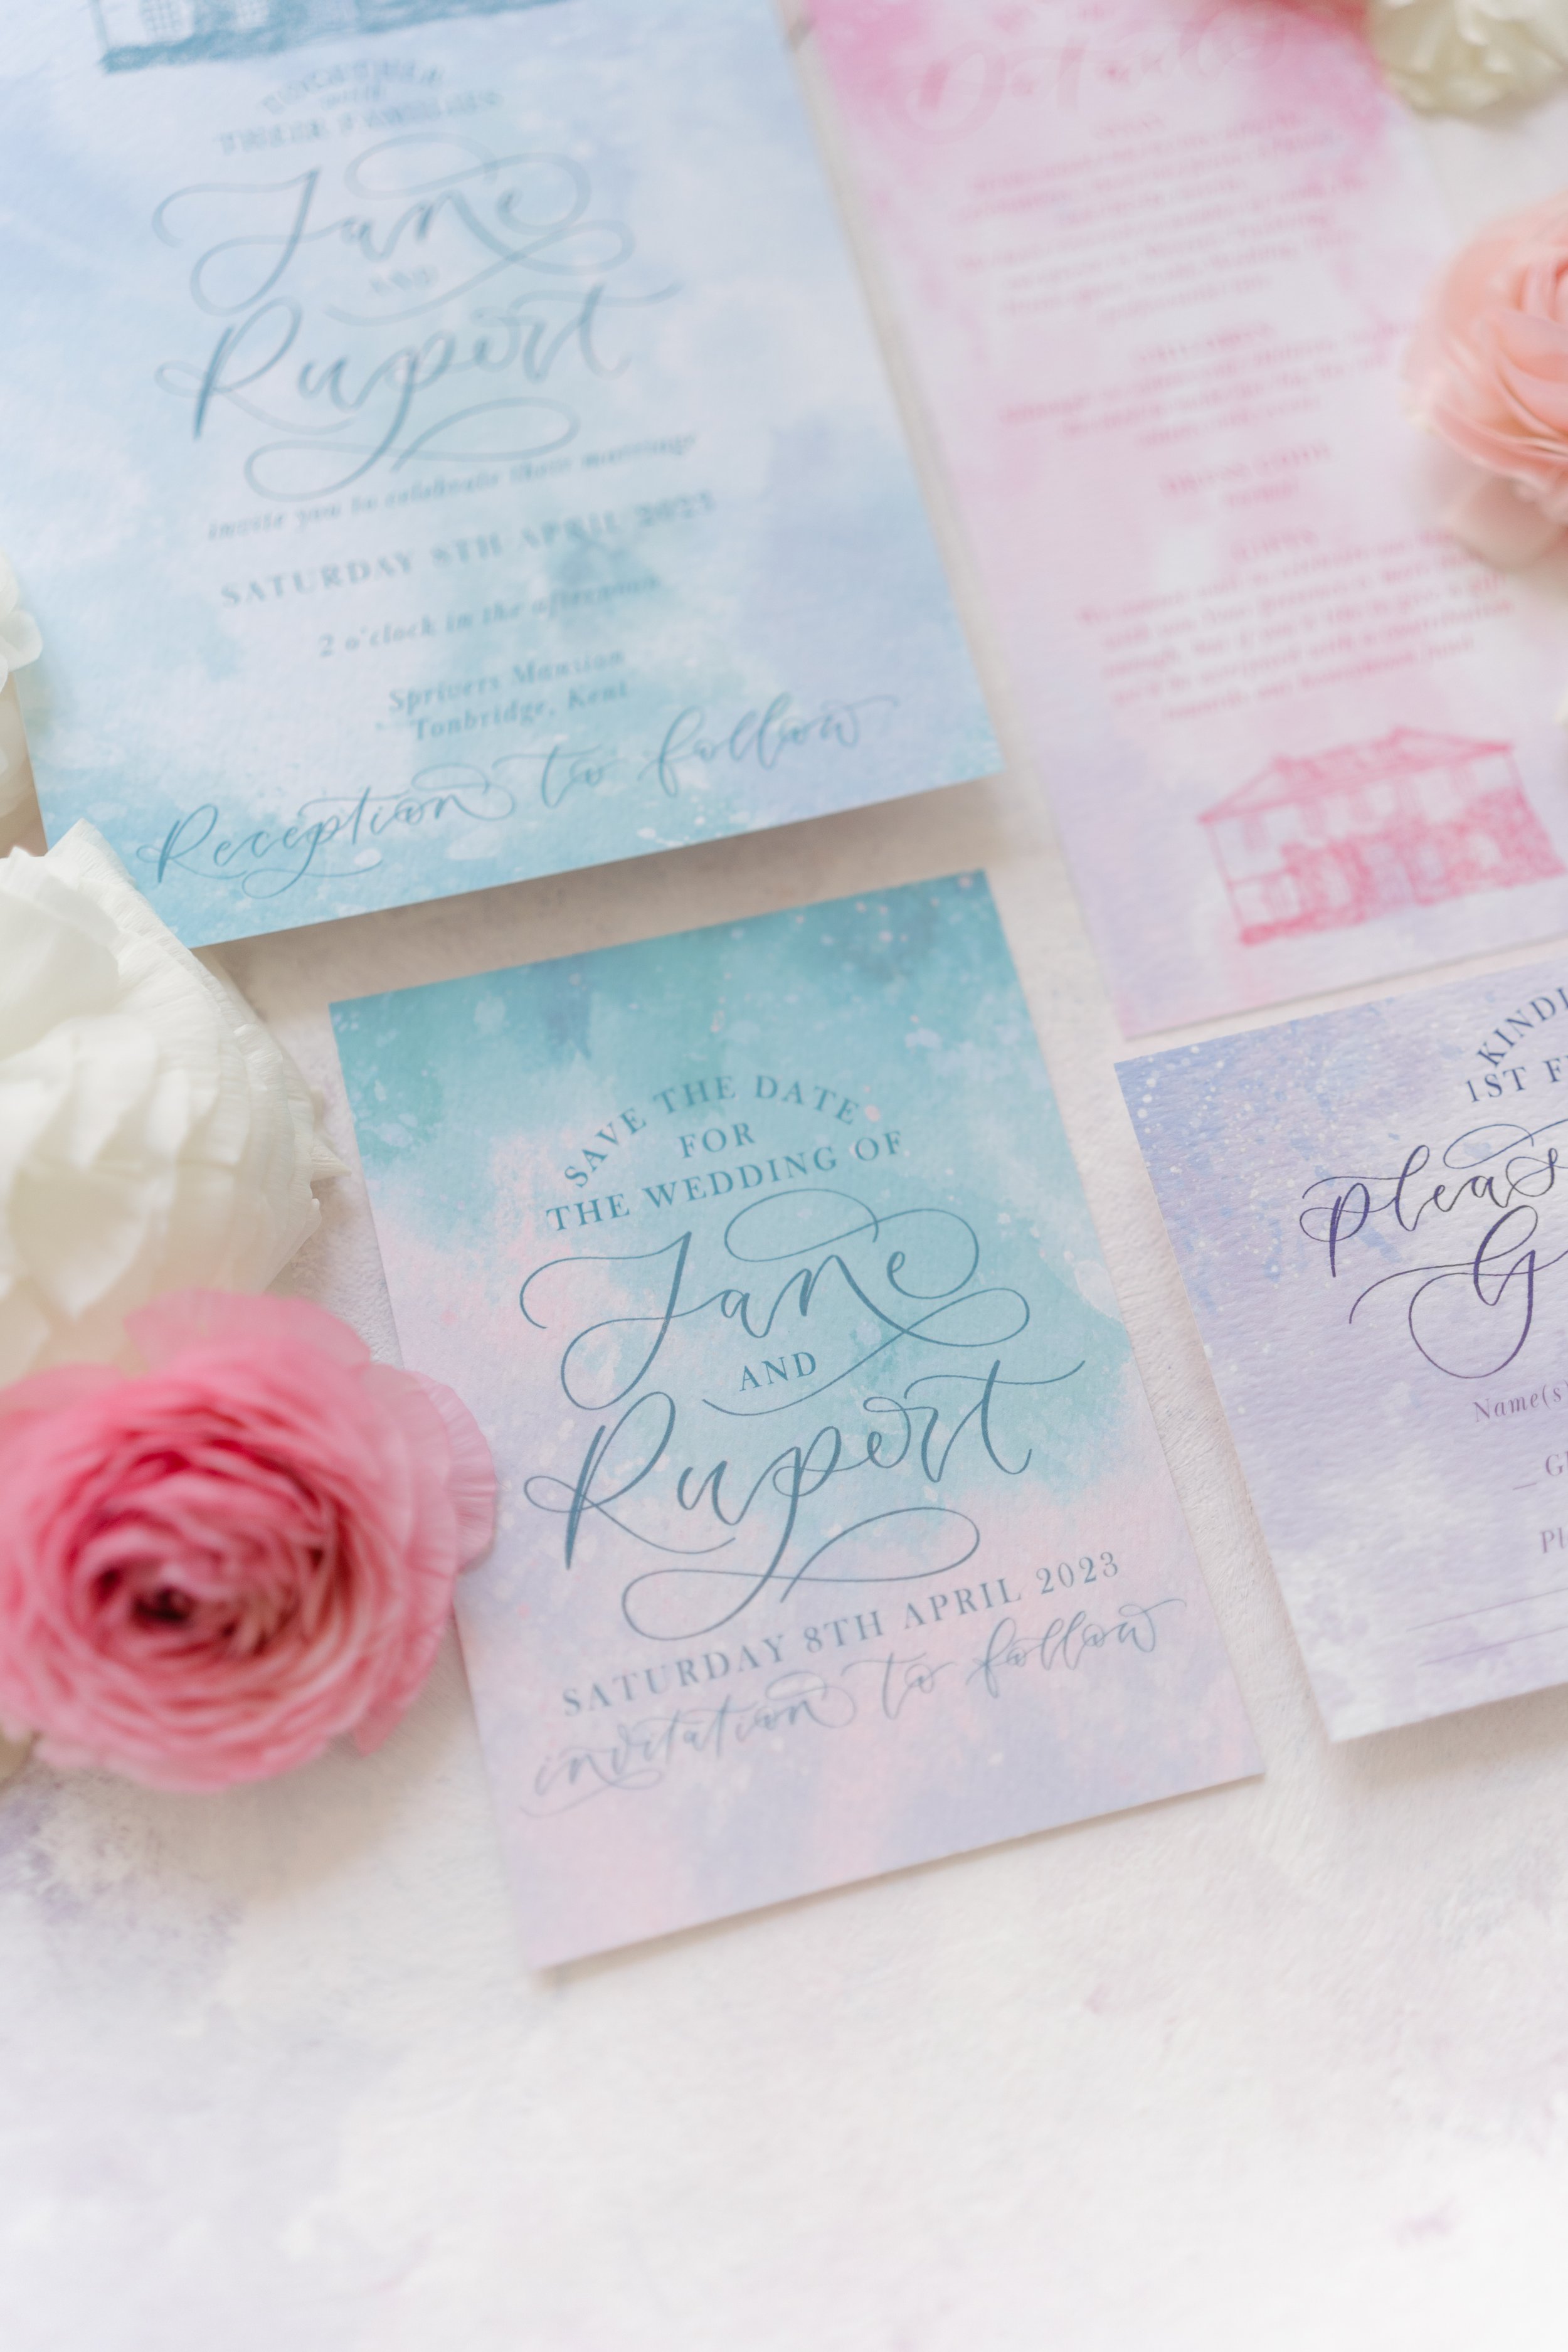 The Amyverse - Teal and pink save the date - pastel invitation set with invite, details card, rsvp card with pastel watercolour washes and venue illustration of sprivers mansion -.jpg